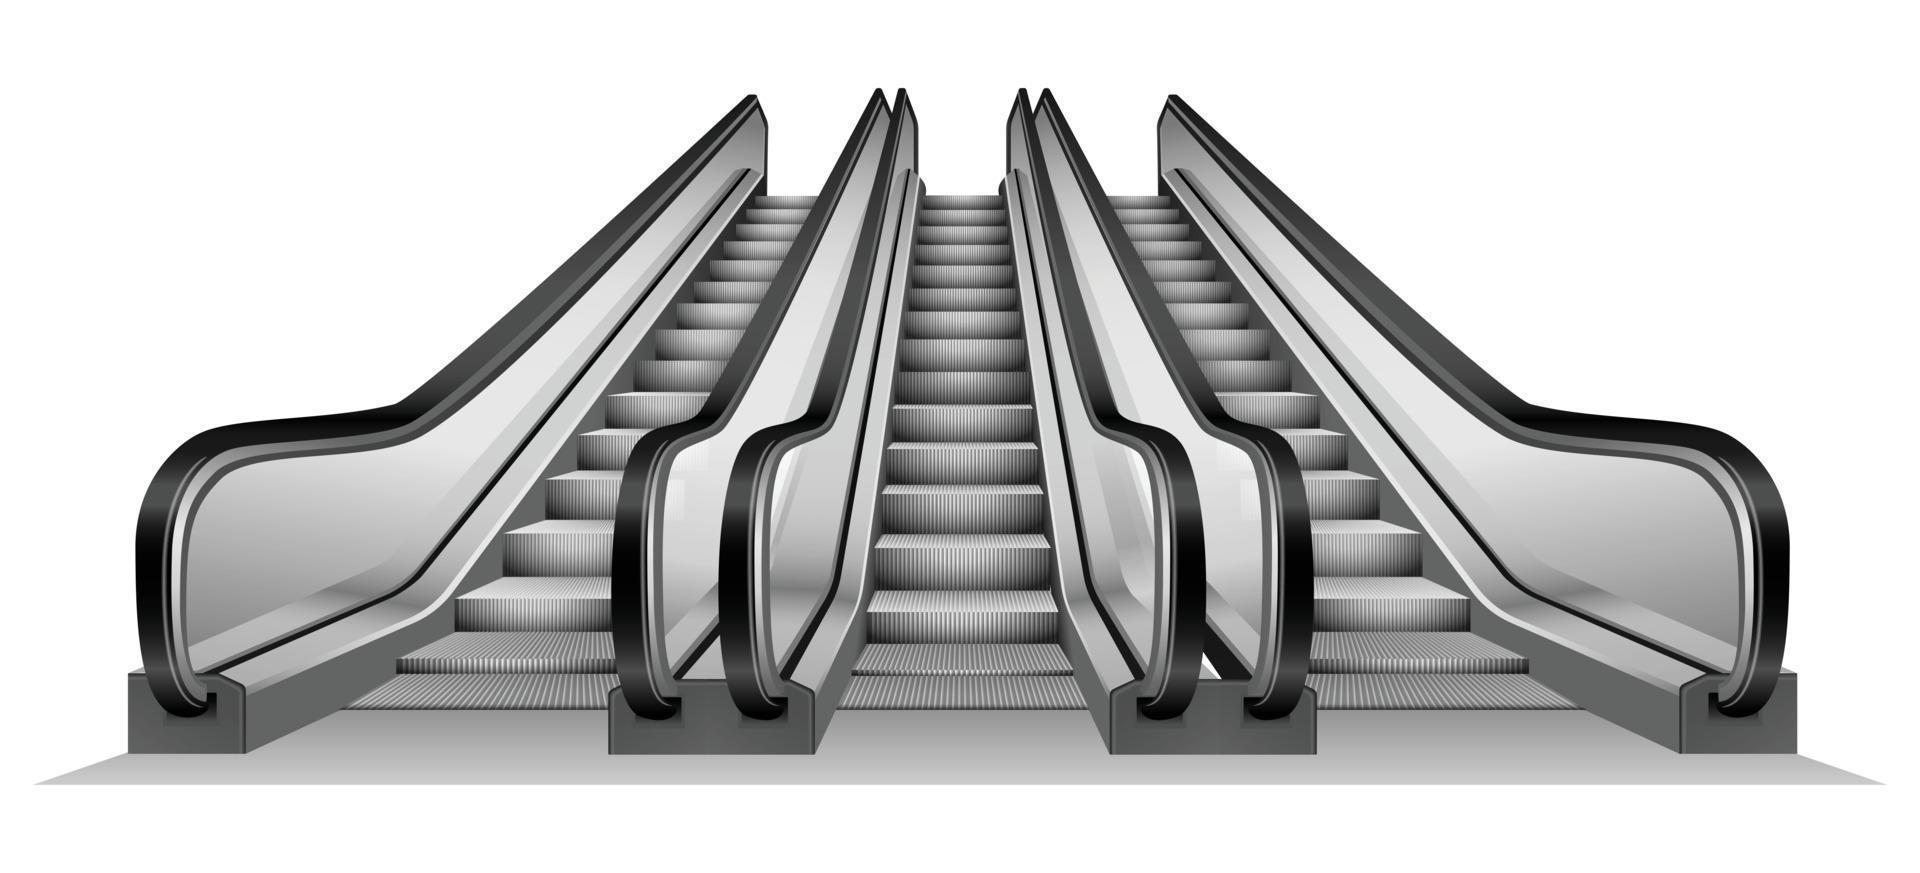 Group of escalator in metro mockup, realistic style vector